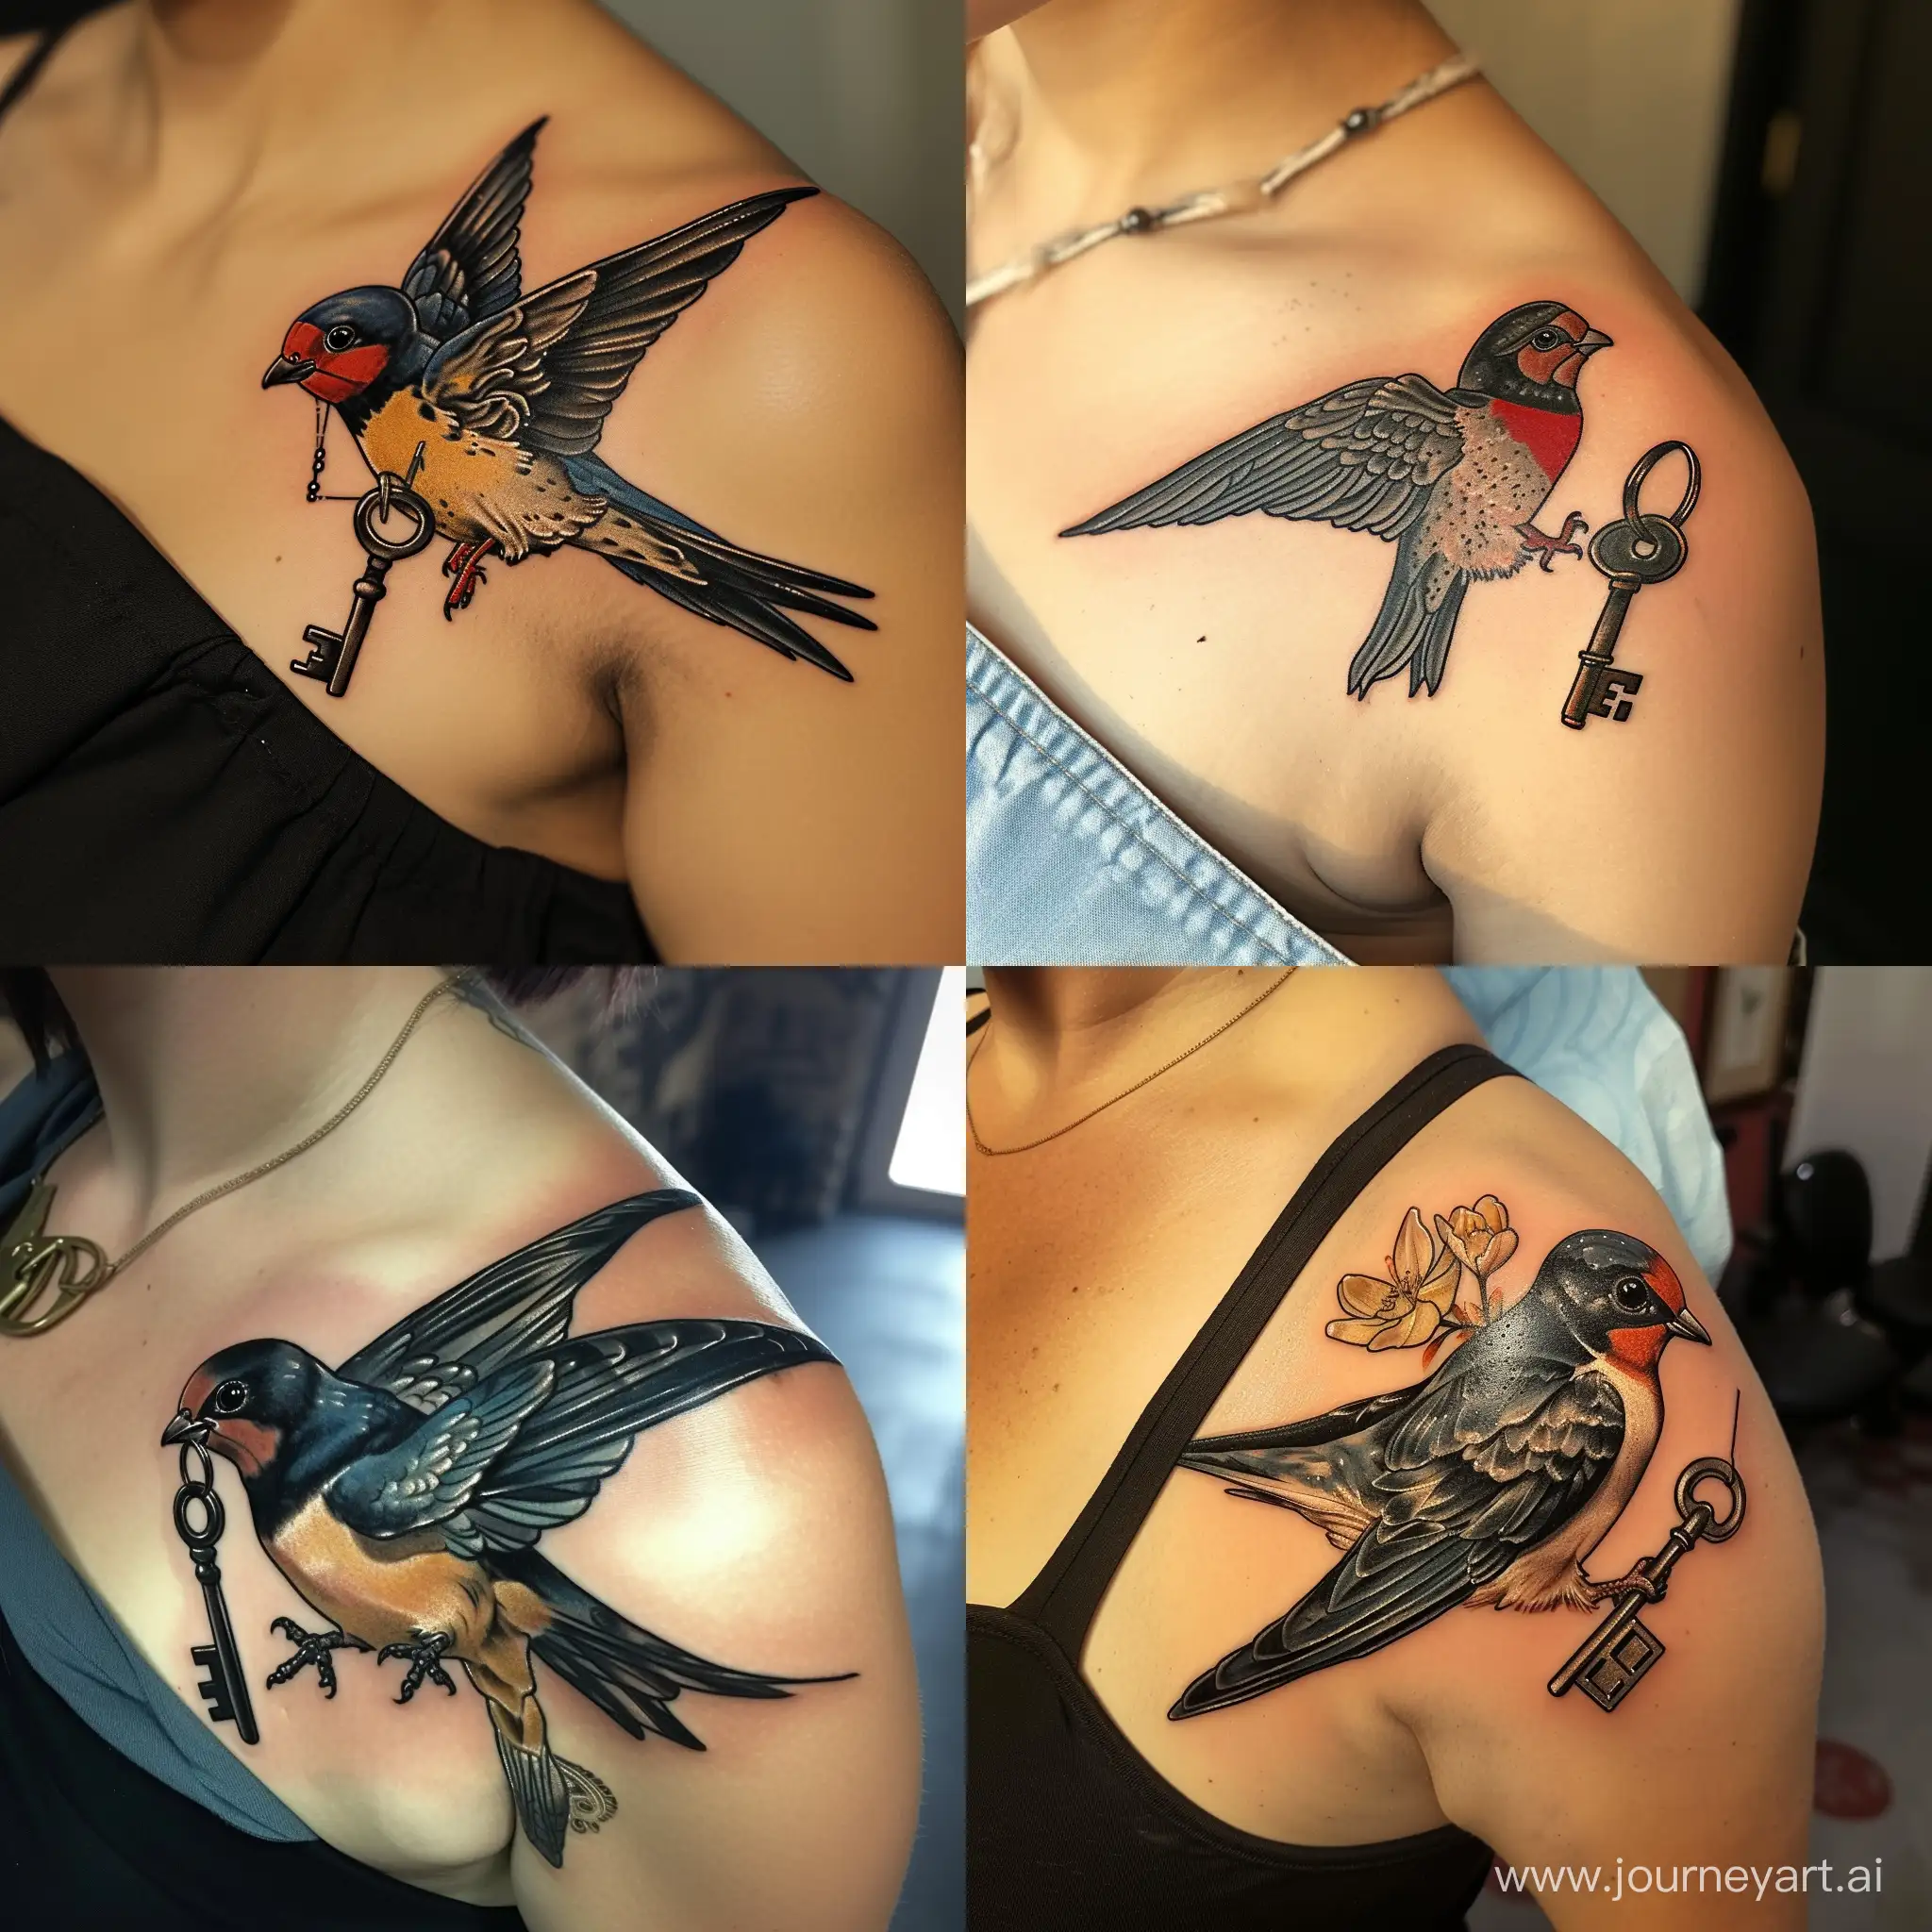 Hyperrealistic-Swallow-Tattoo-with-Key-on-Girls-Shoulder